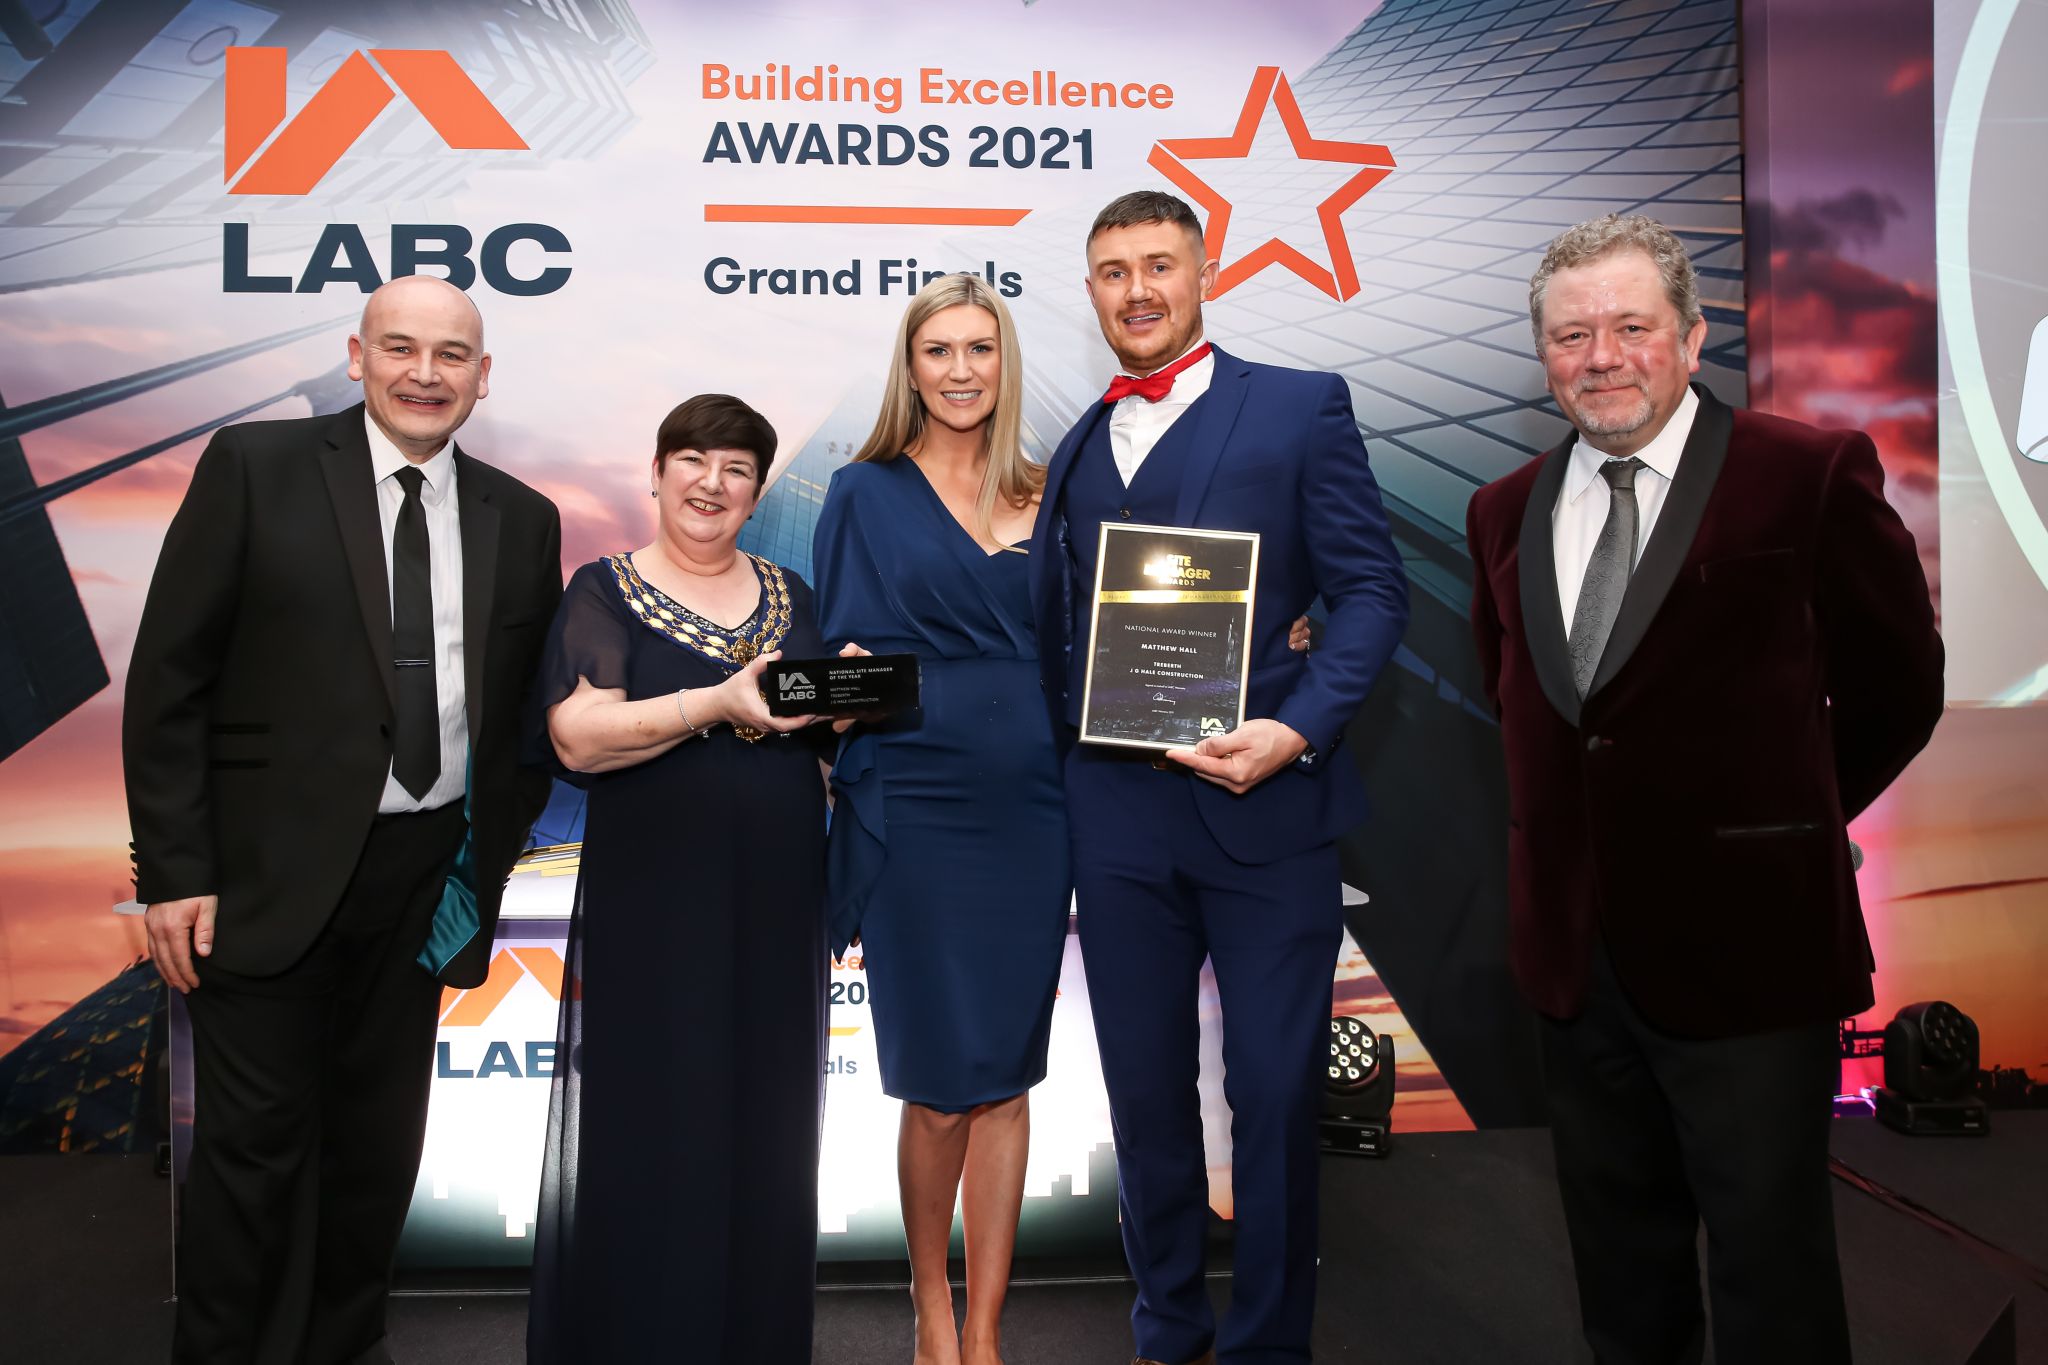 J.G. Hale Construction Site Manager wins LABC National Site Manager of